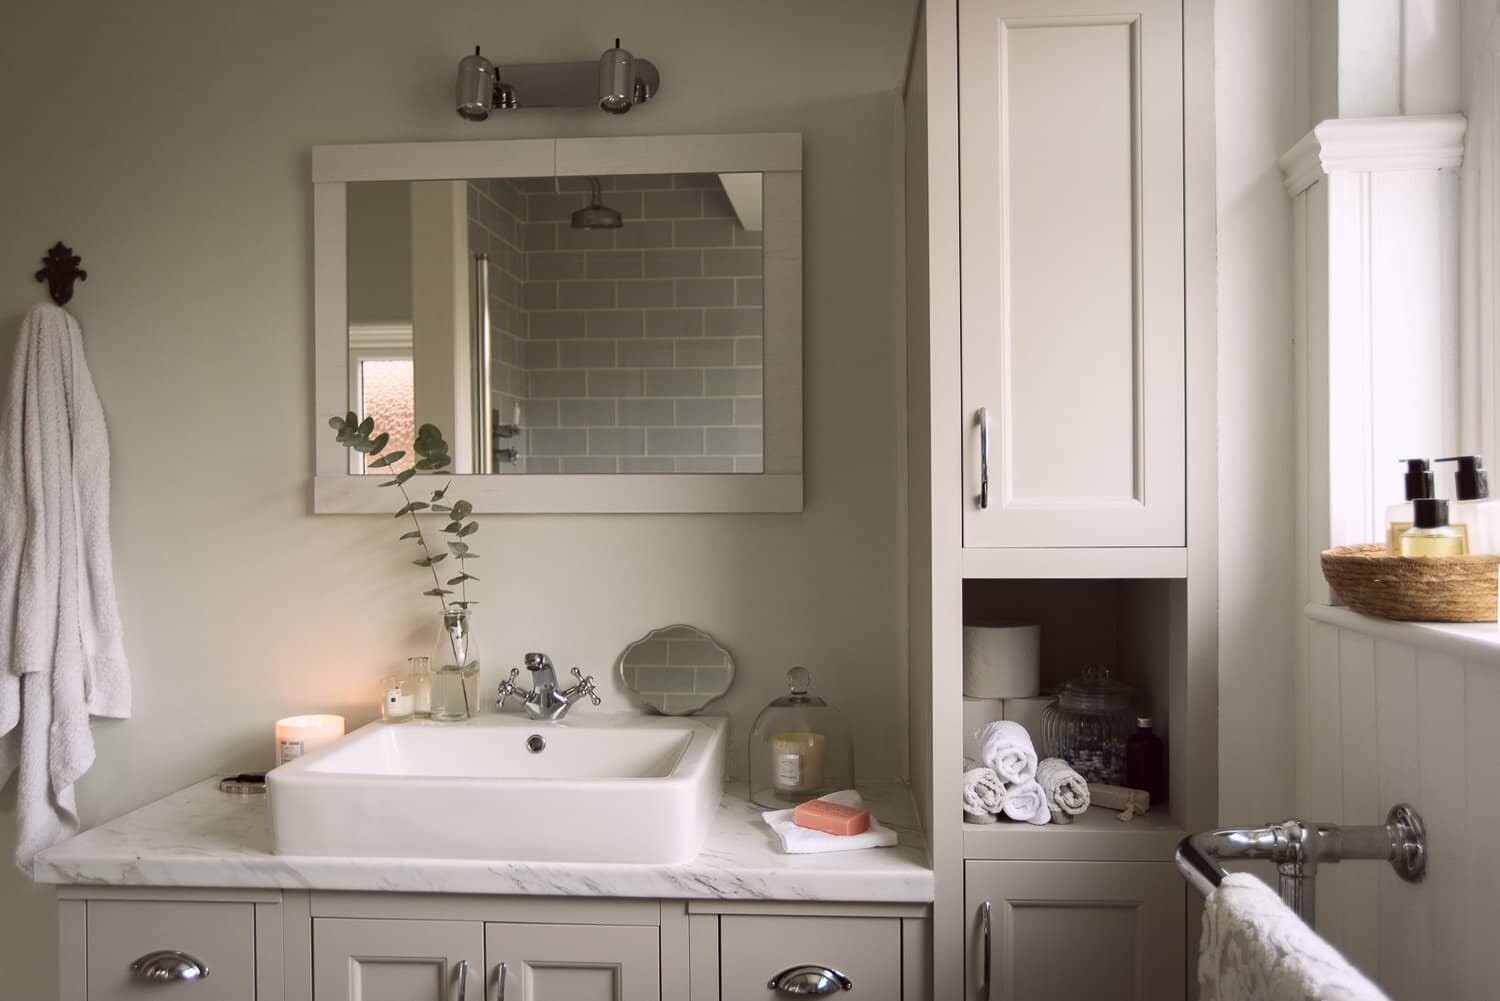 A Bathroom Renovation Cost, How Much Does It Cost To Remodel A Small Bathroom Uk